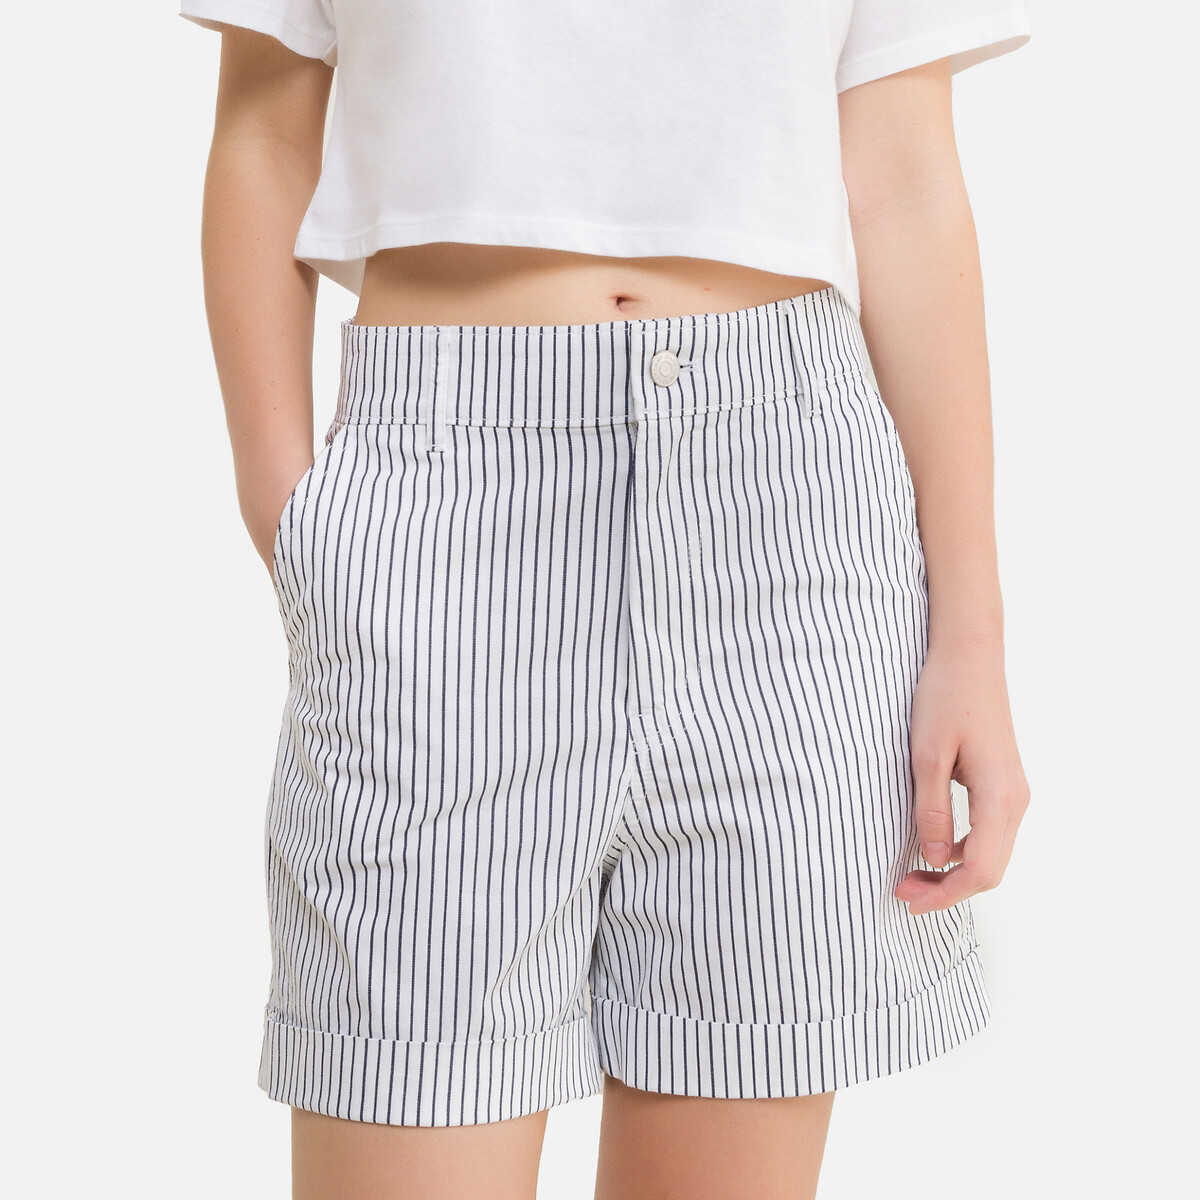 Blue And White Striped Shorts Womens - hilltopstory